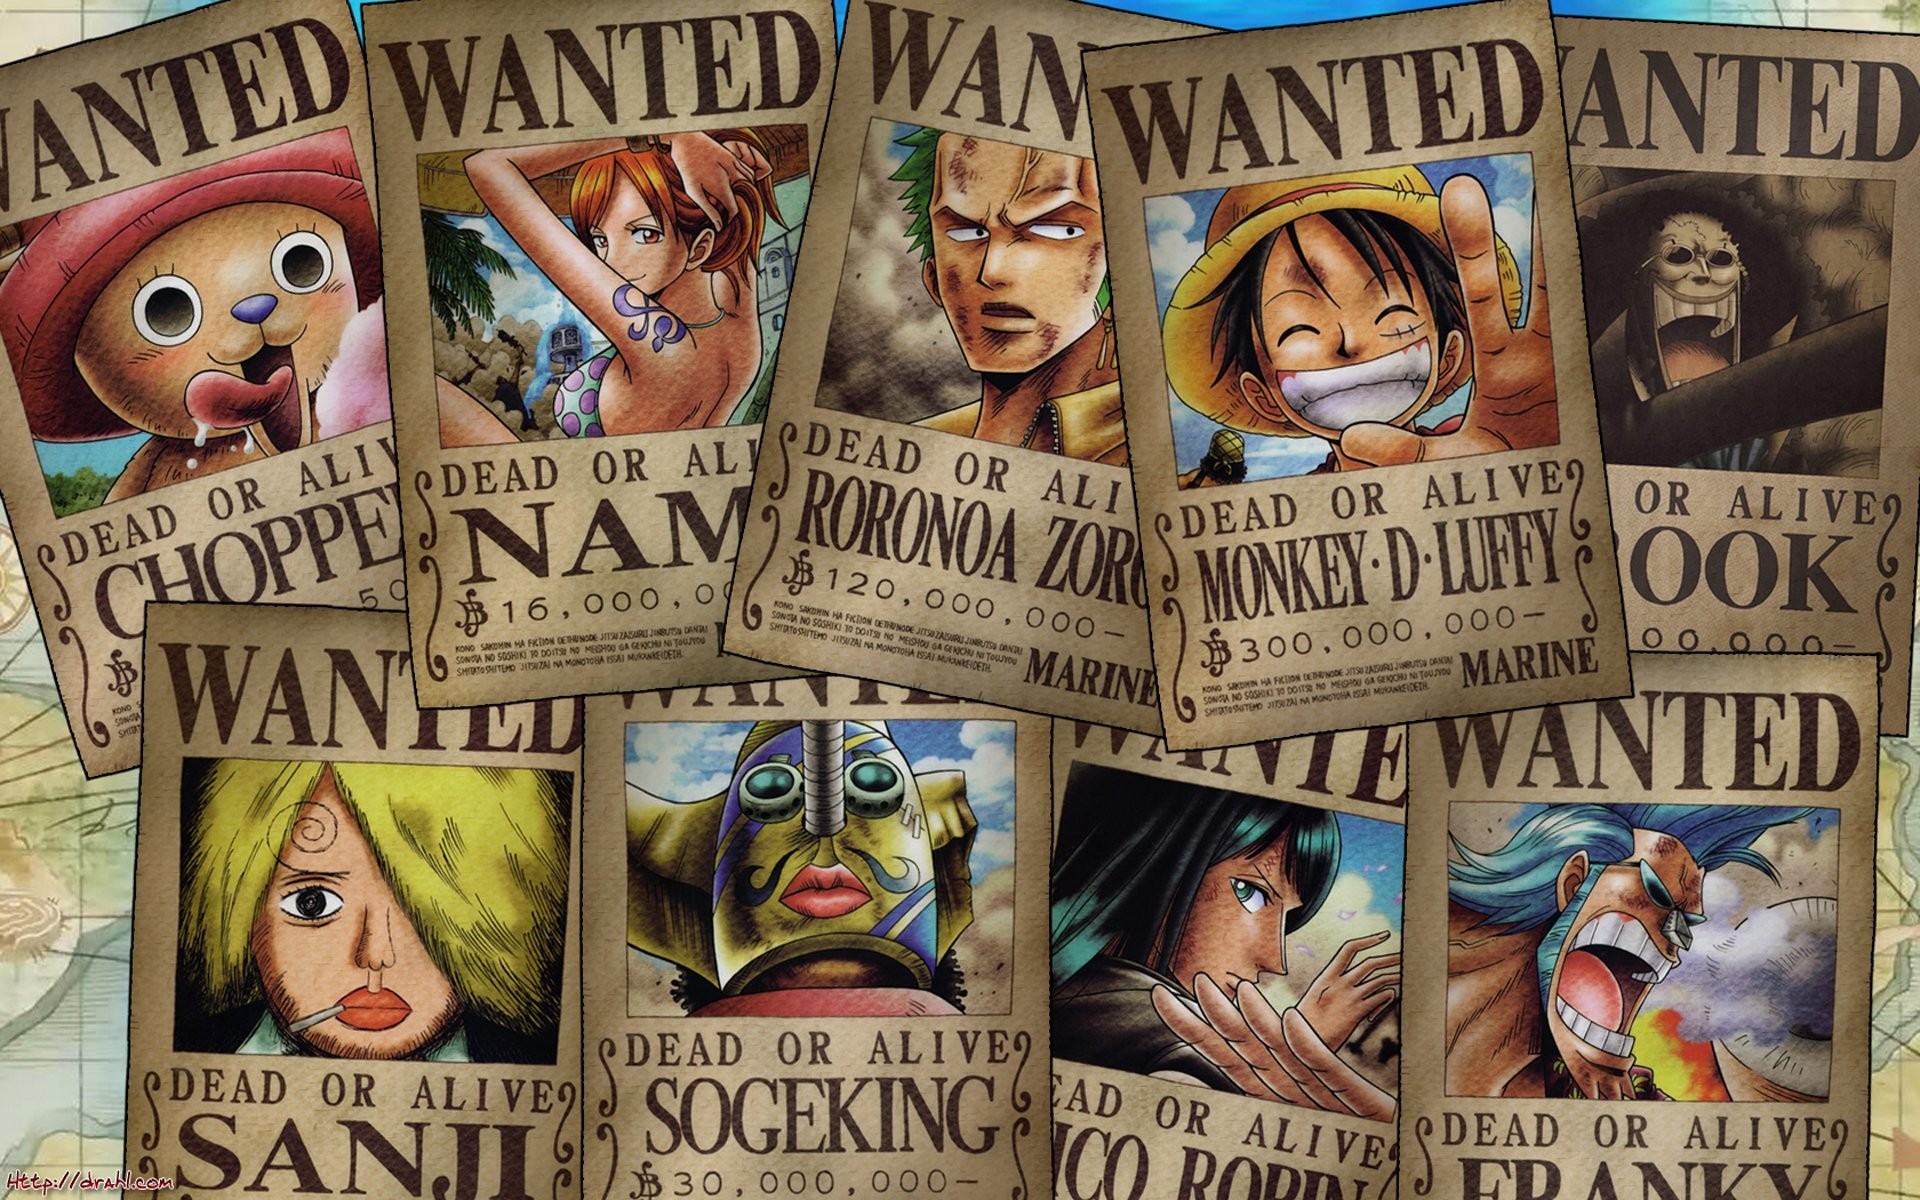 One Piece Wallpaper Wanted Wallpapertag Images, Photos, Reviews